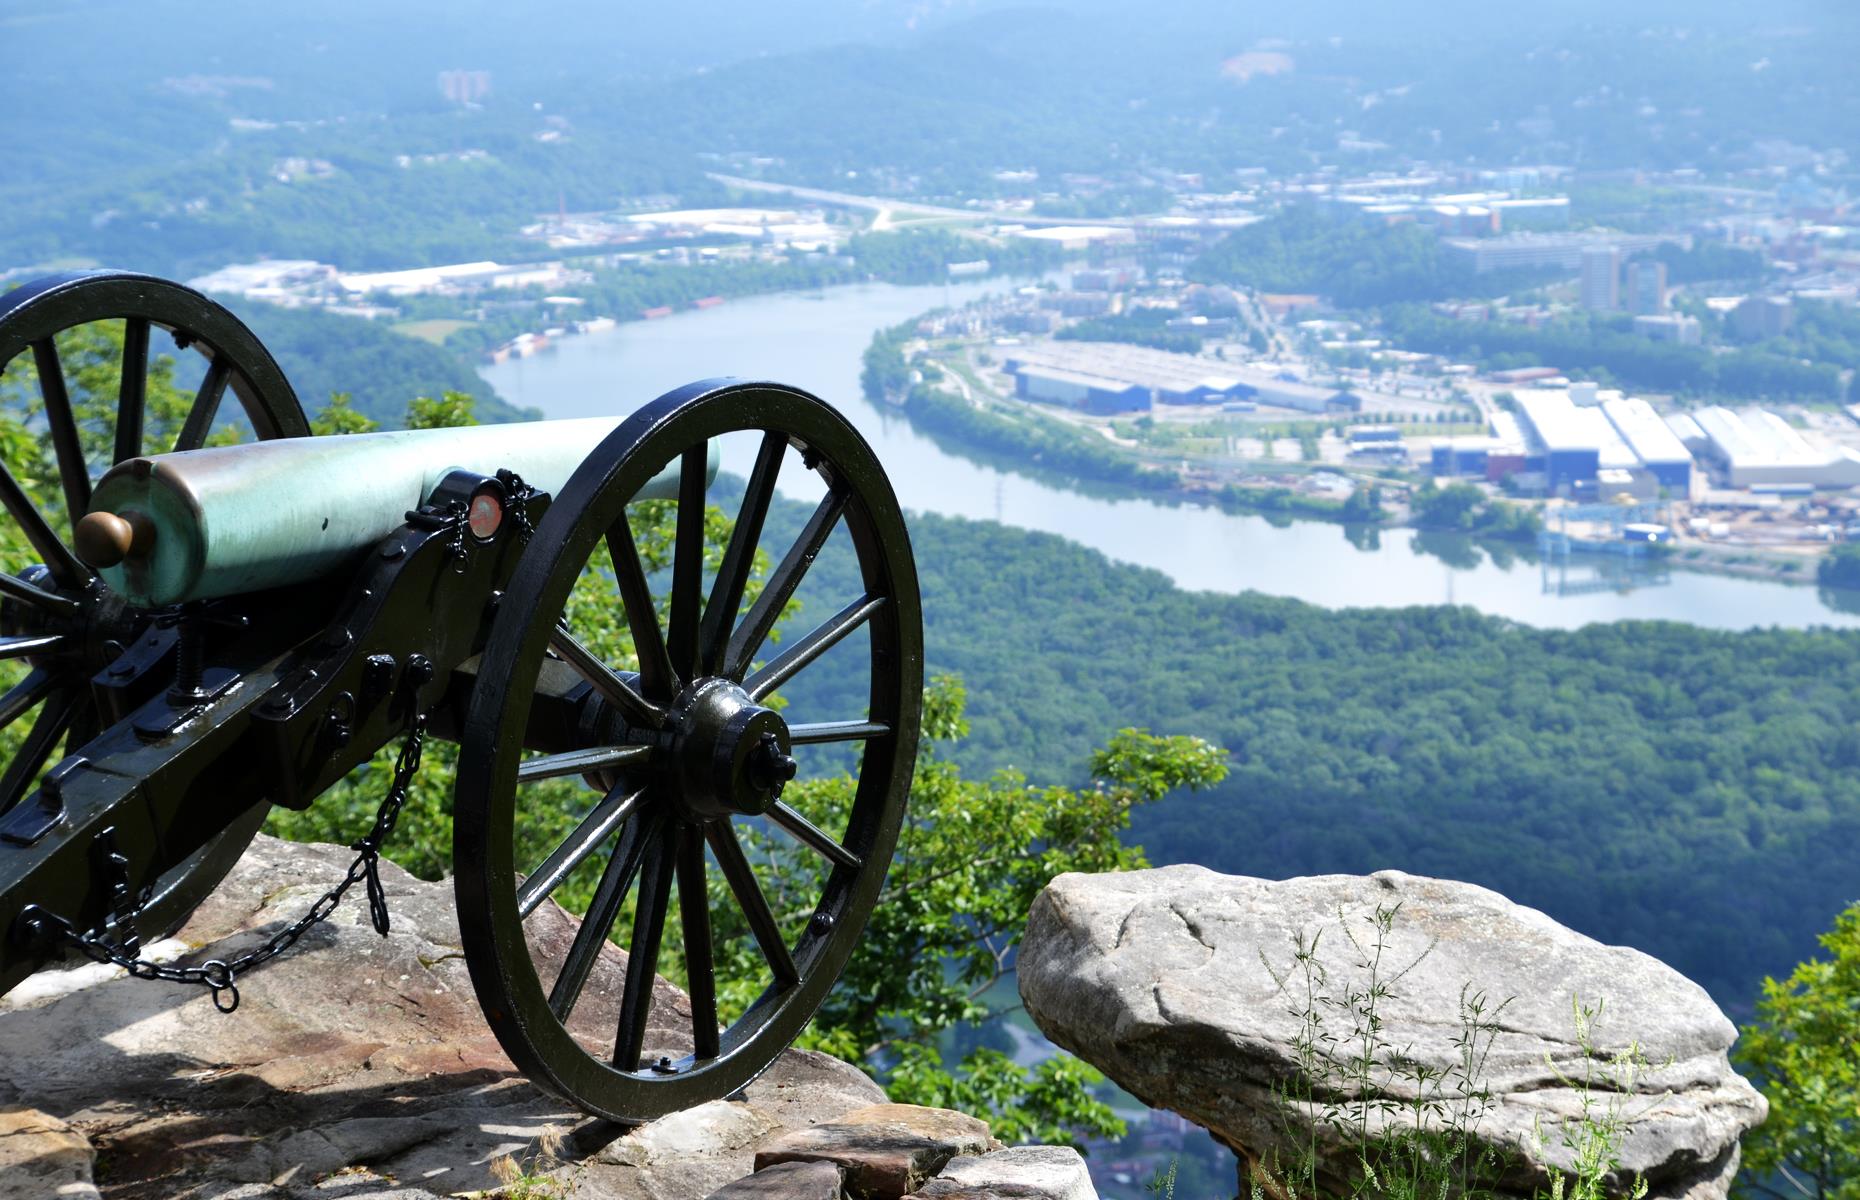 This was the site of several important battles between Confederate and Union soldiers during the Civil War. In 1863, Union troops attempted to, and succeeded in, seizing Chattanooga, a city in eastern Tennessee surrounded by mountains. Today, the battlefields that make up the park have miles of hiking trails and lookout points with expansive views across Chattanooga and the Tennessee river below.